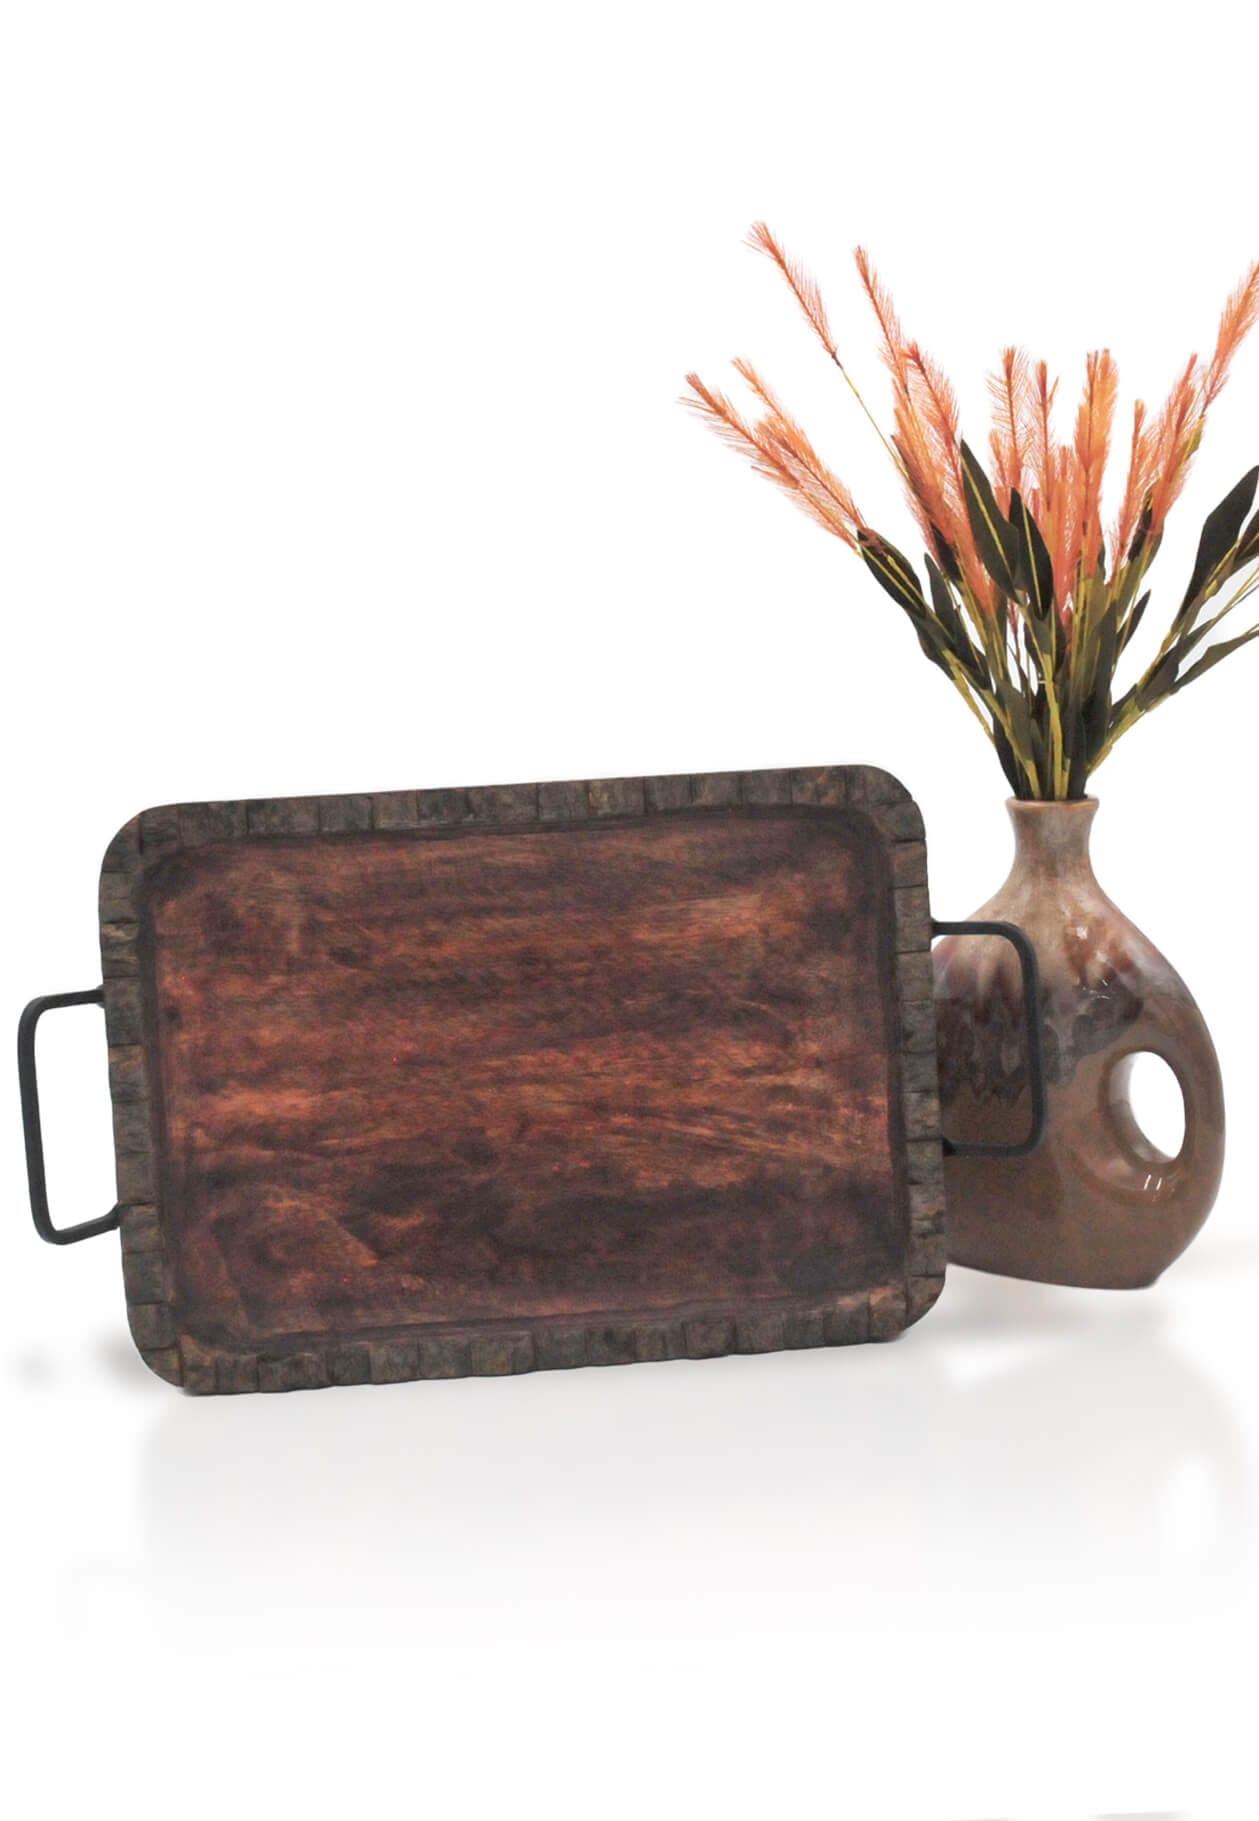 My Bud Vase Wholesale Accessories Woodland Rolling Tray